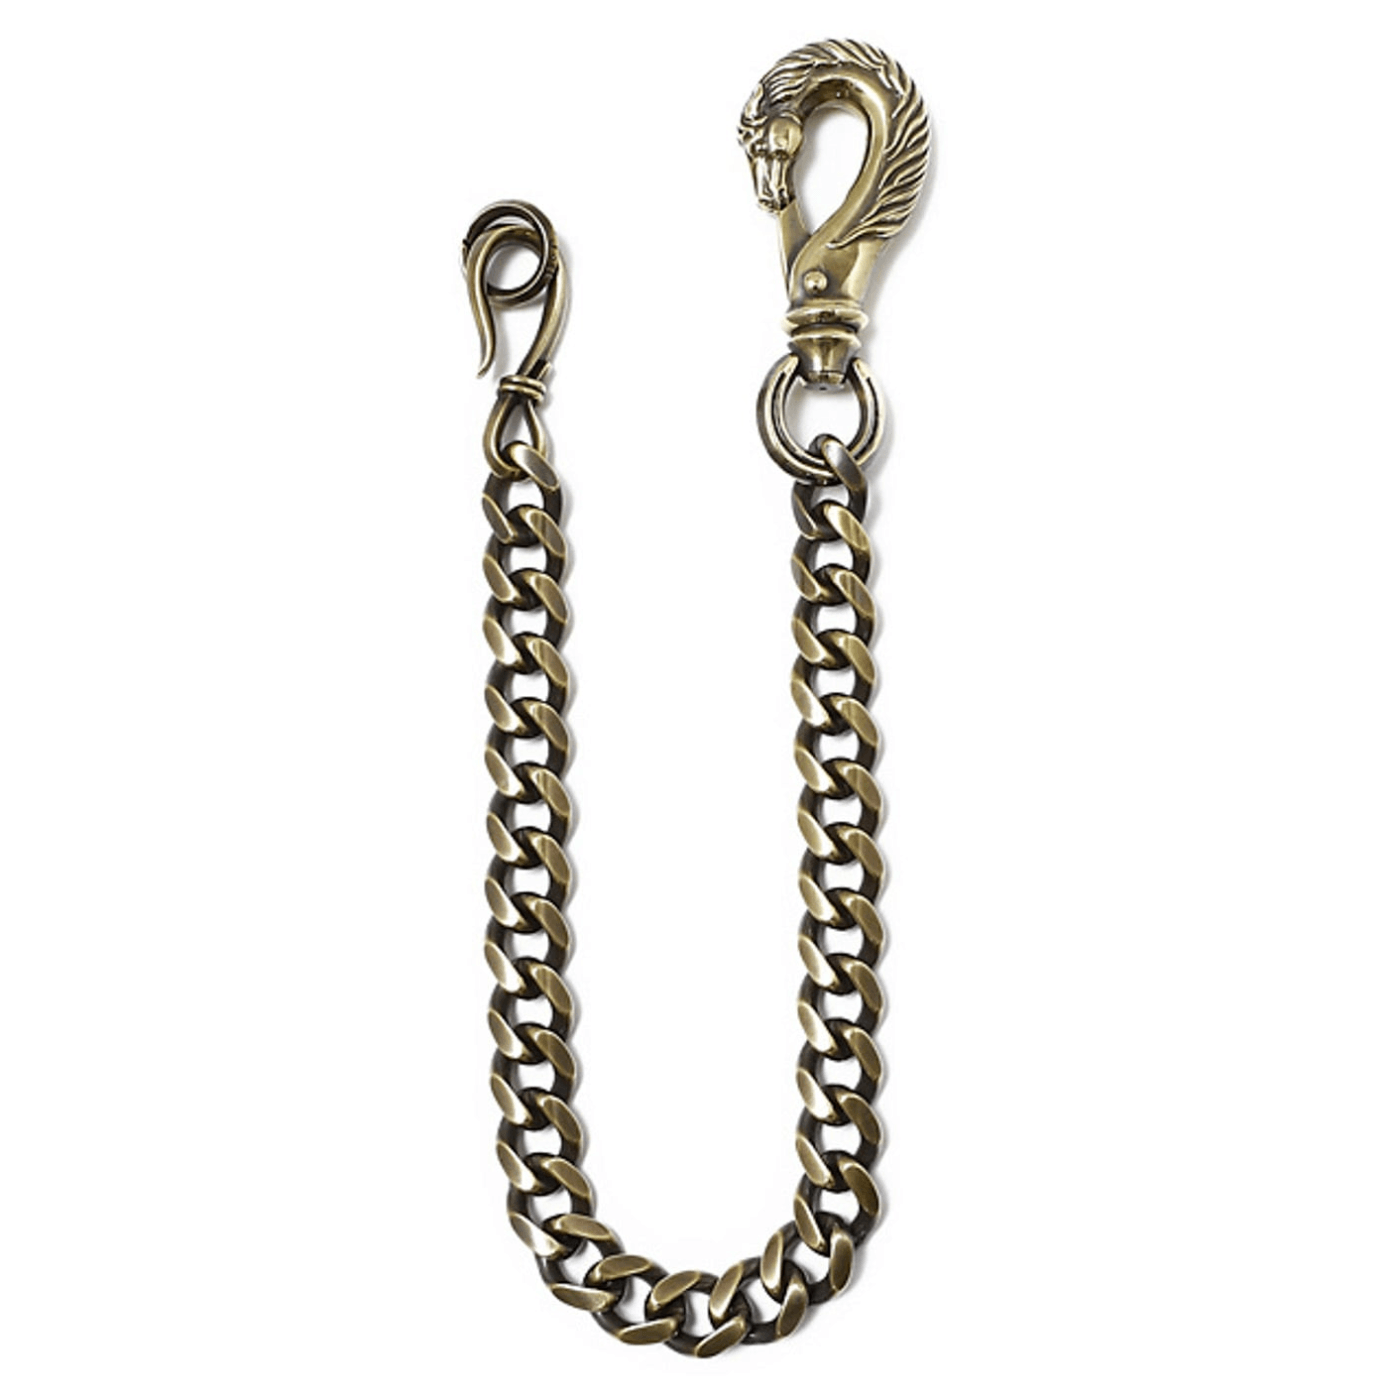 Peanuts & Co Horse Wallet Chain (horse×hook) - Brass